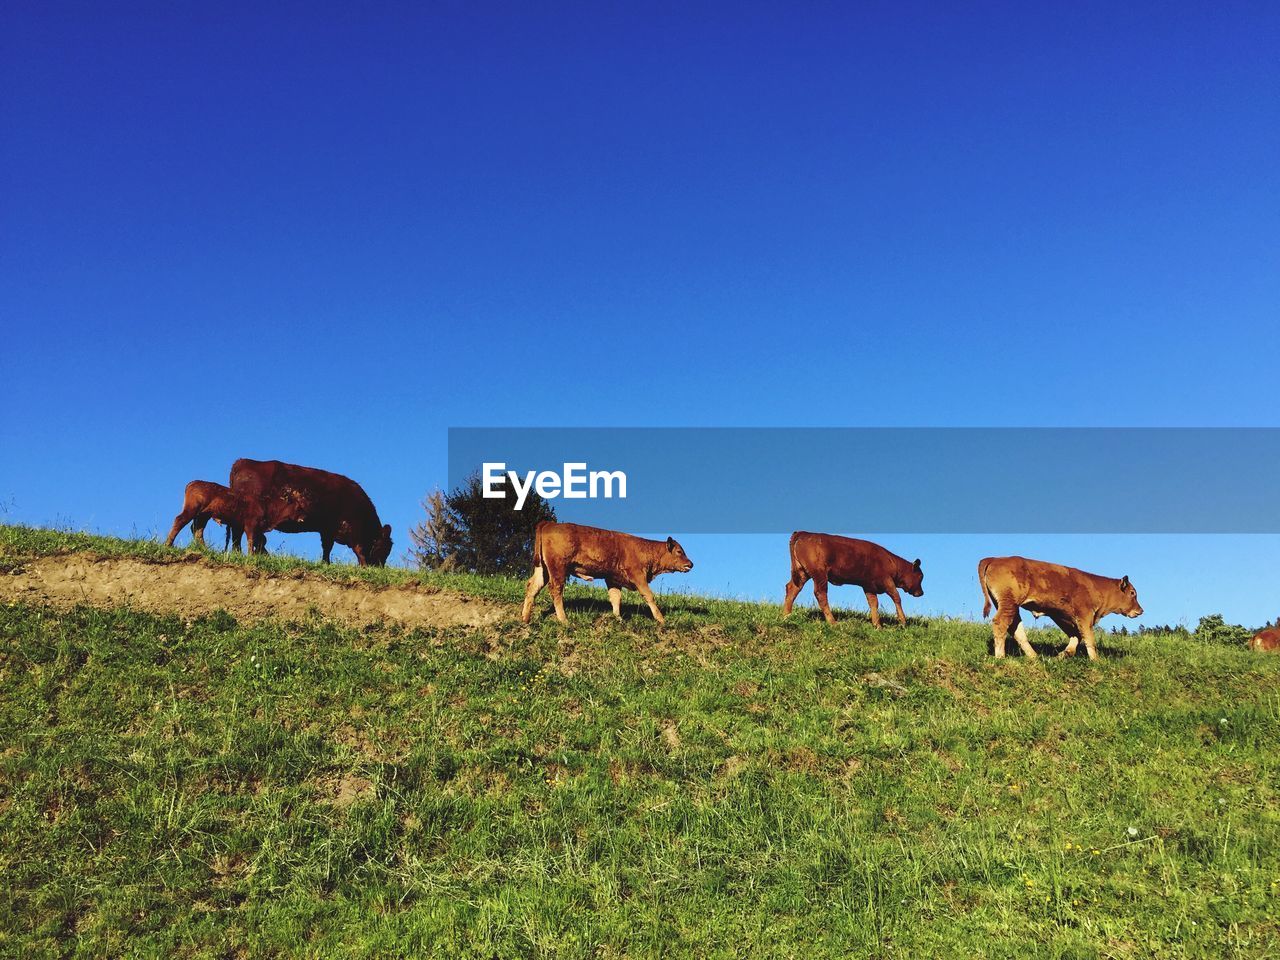 HORSES GRAZING ON FIELD AGAINST CLEAR BLUE SKY